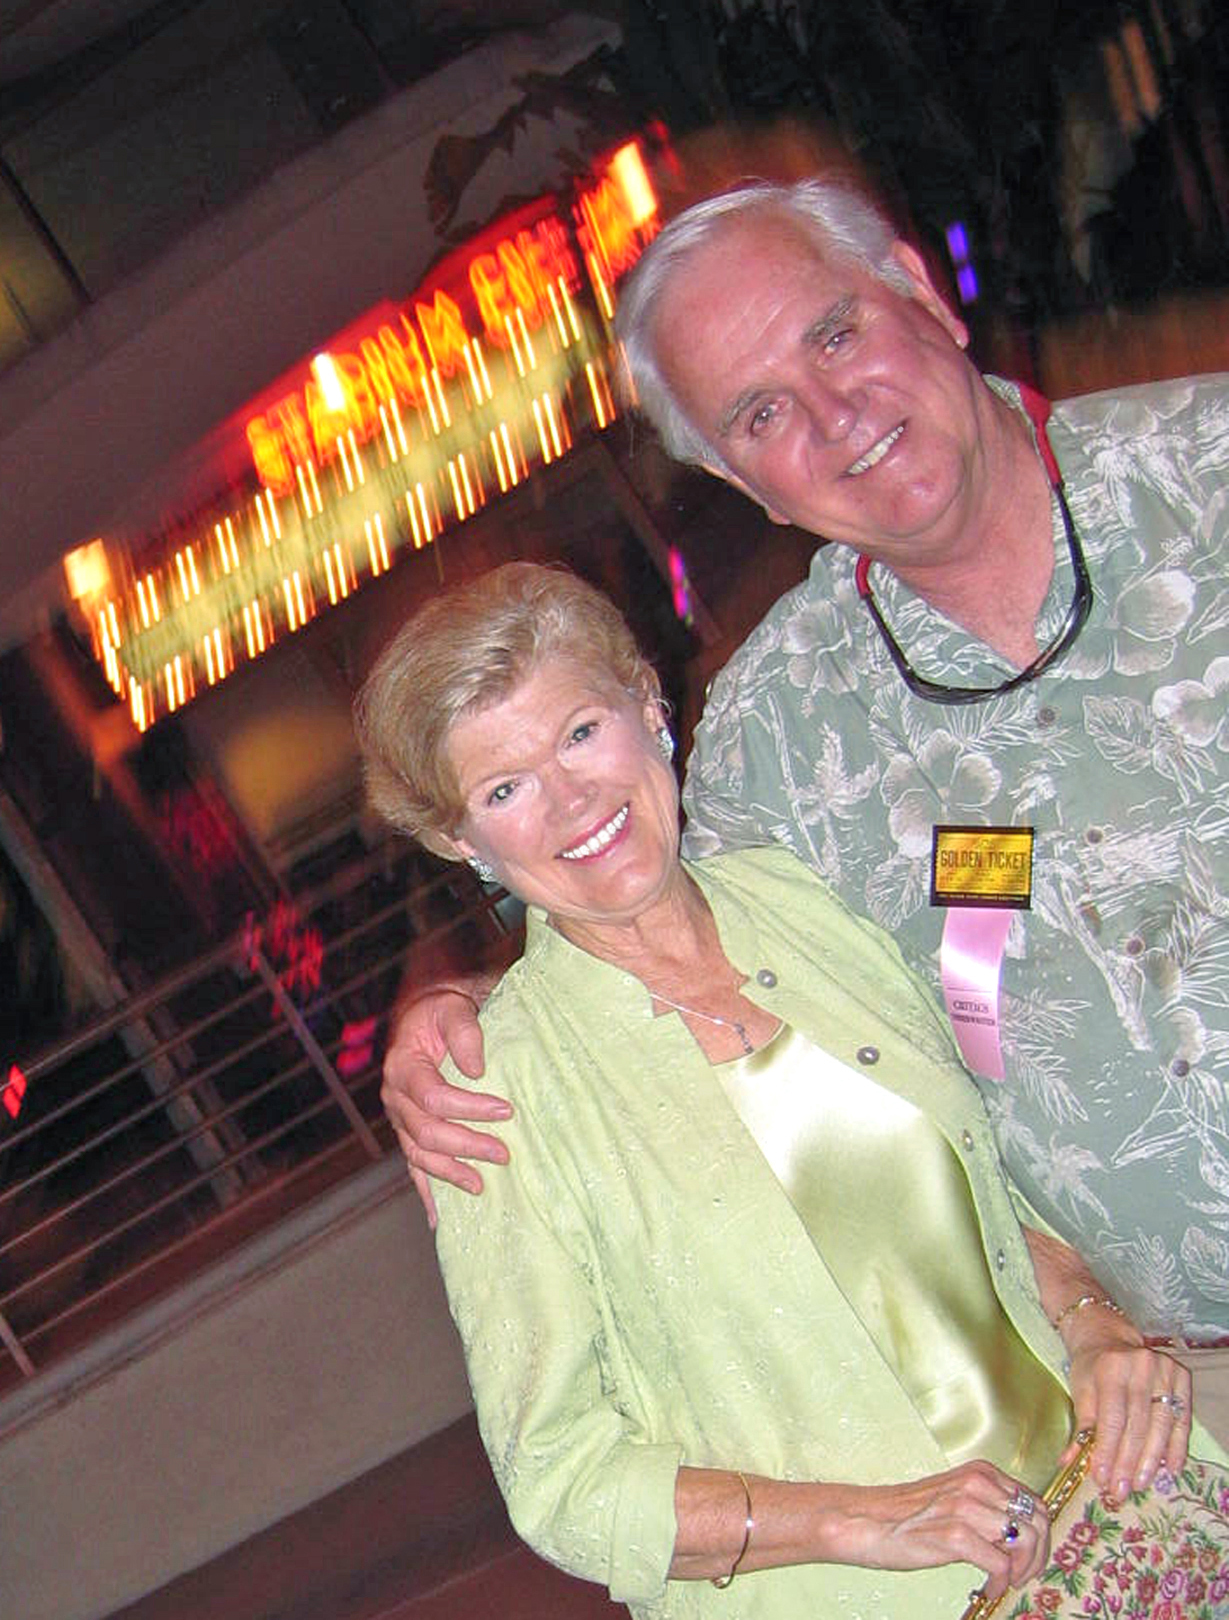 Author John J. Gobbell and wife Janine